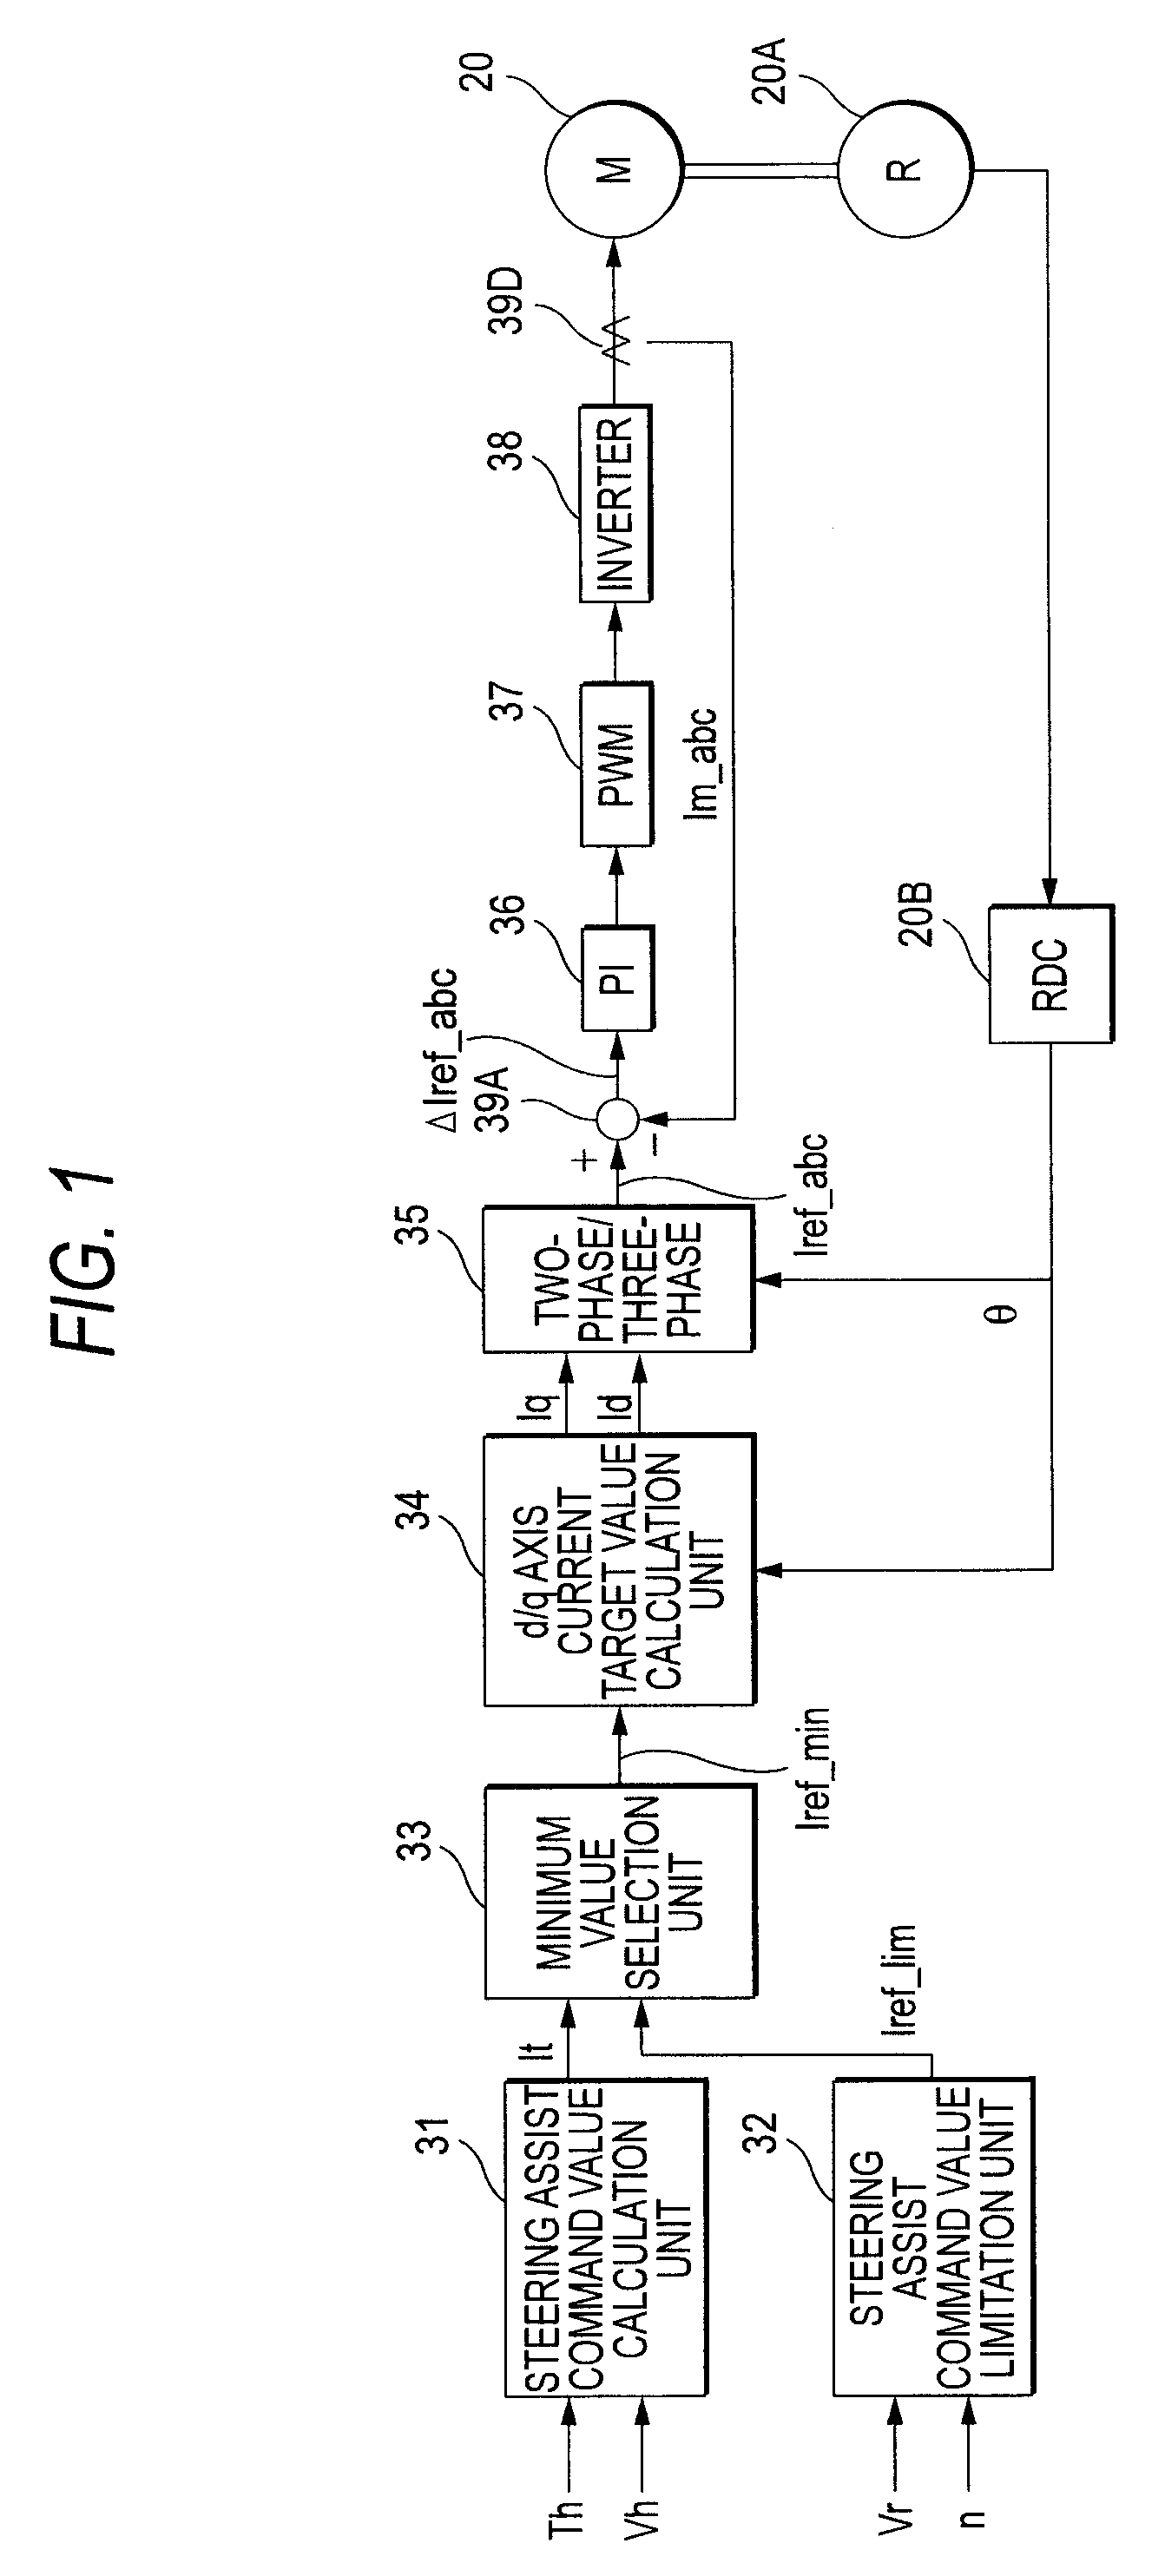 Control device for electric power steering apparatus